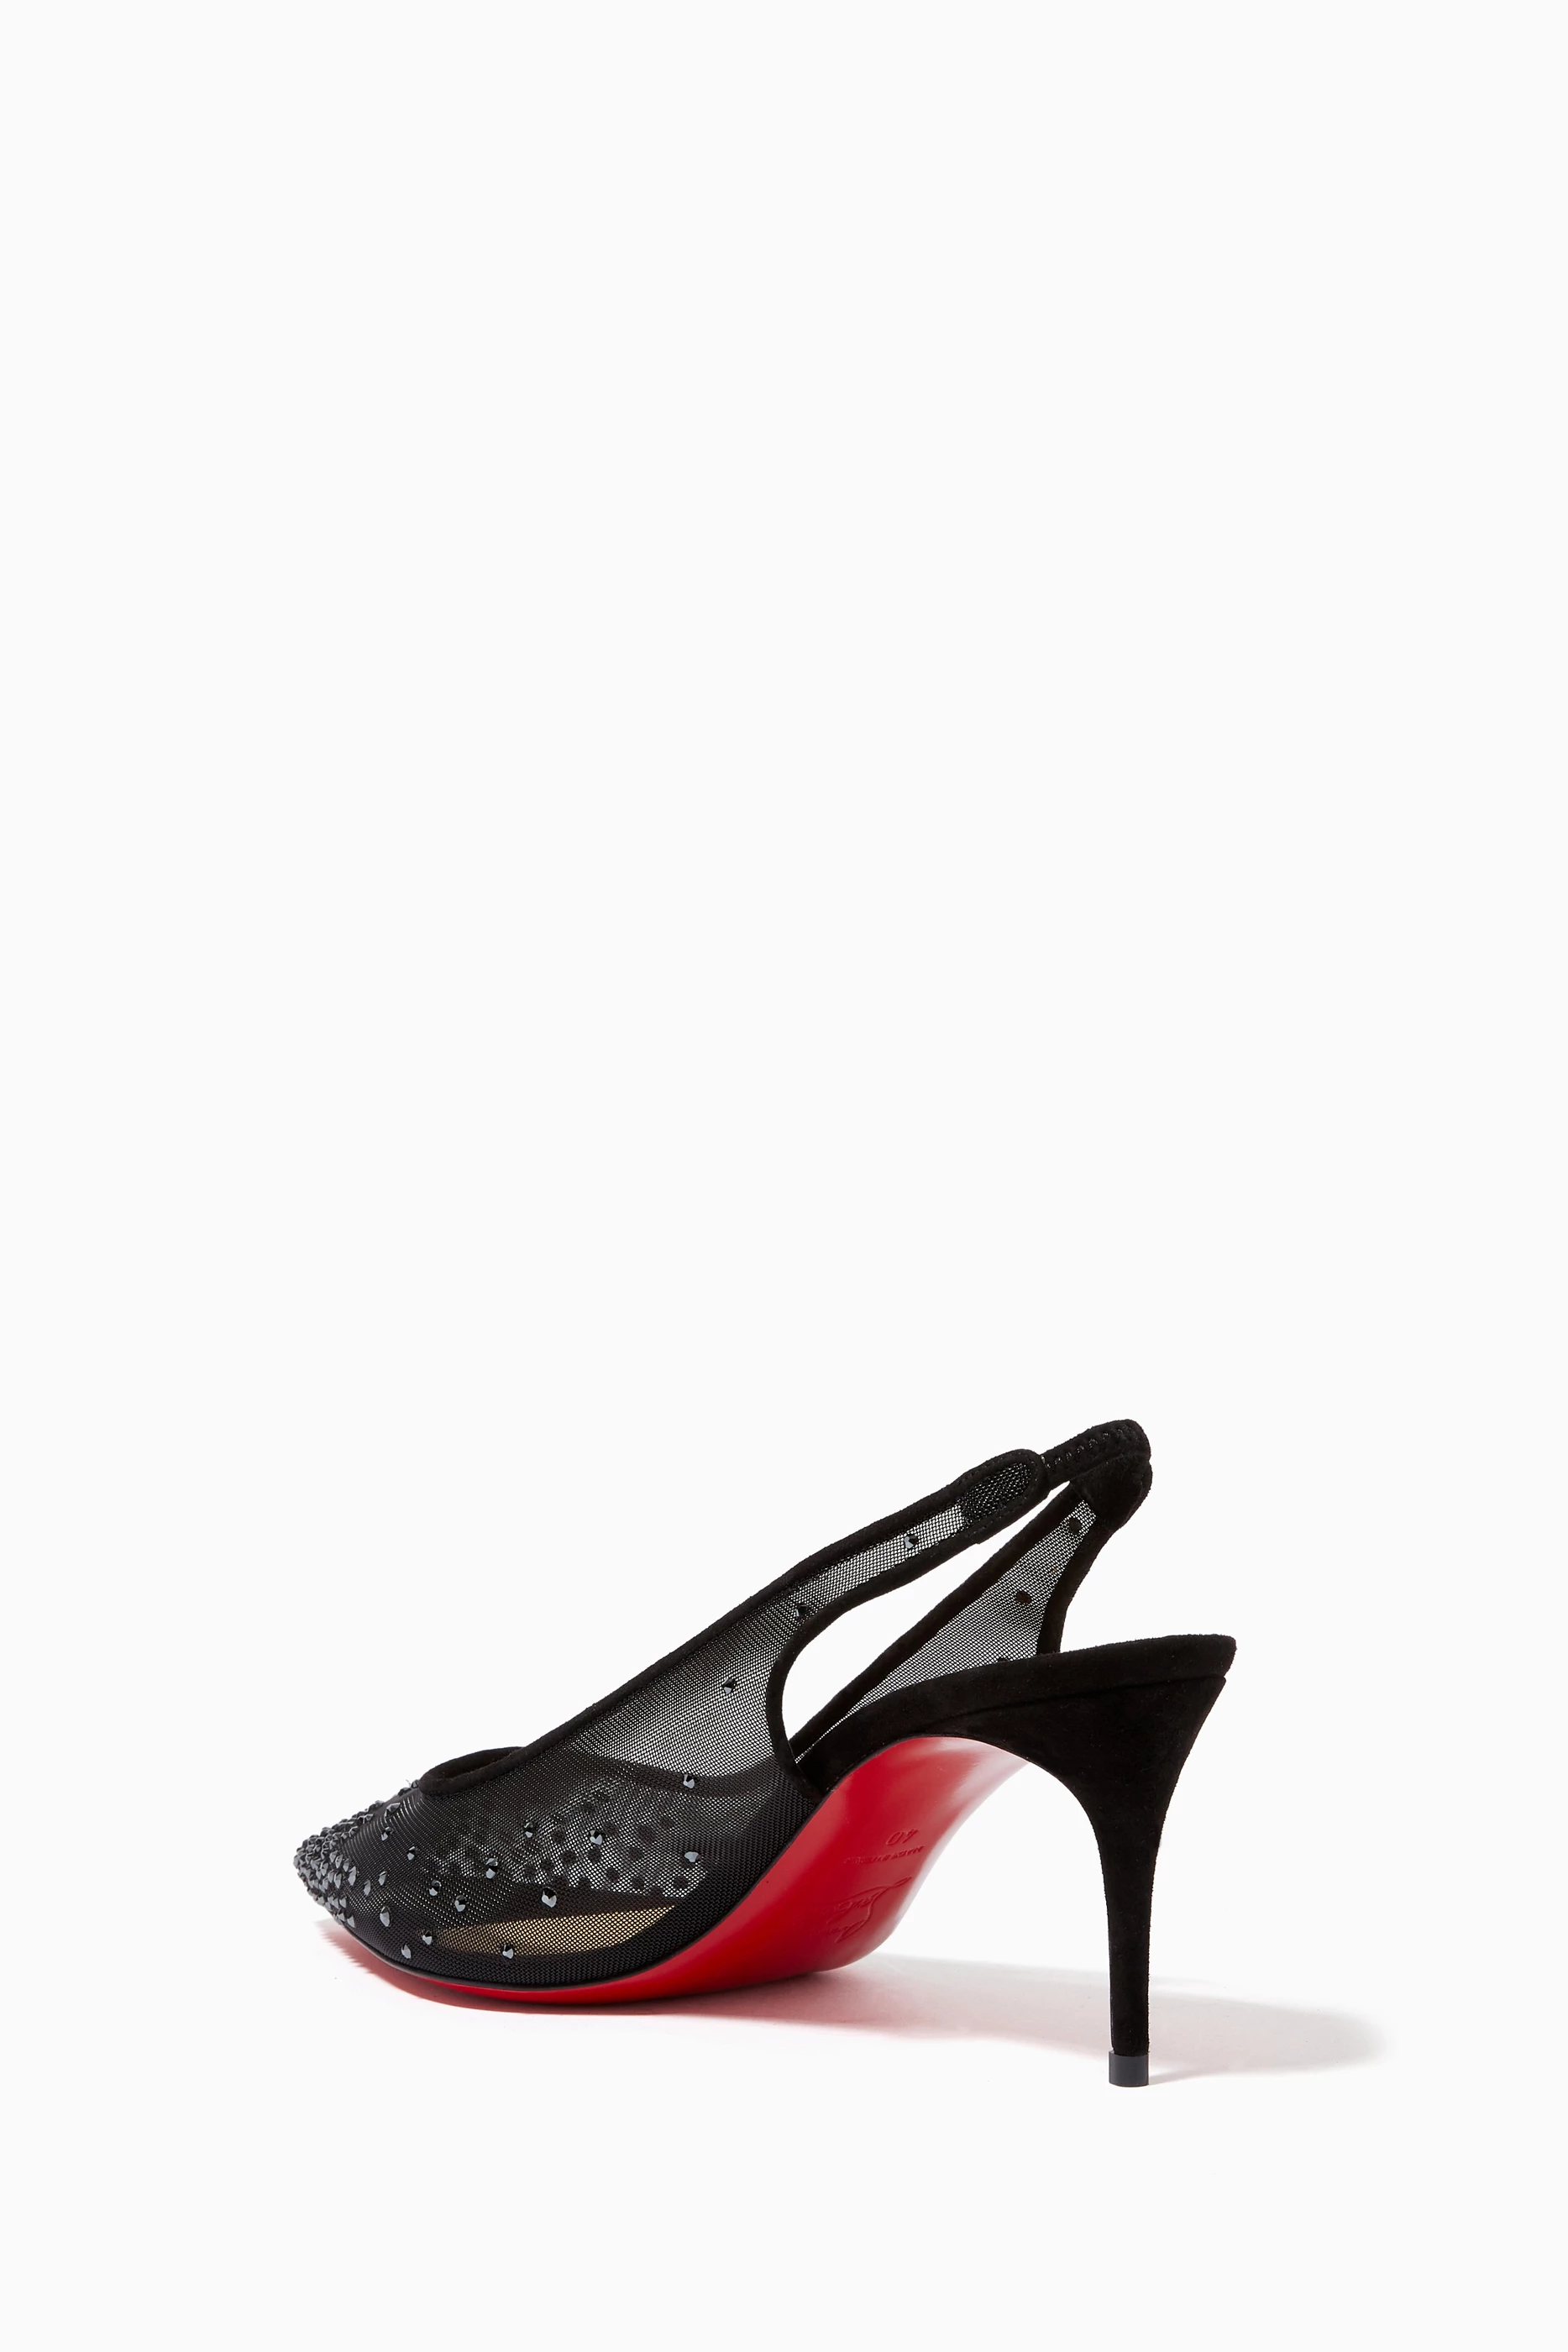 CHRISTIAN LOUBOUTIN - Follies Strass Sling 70 mesh and suede